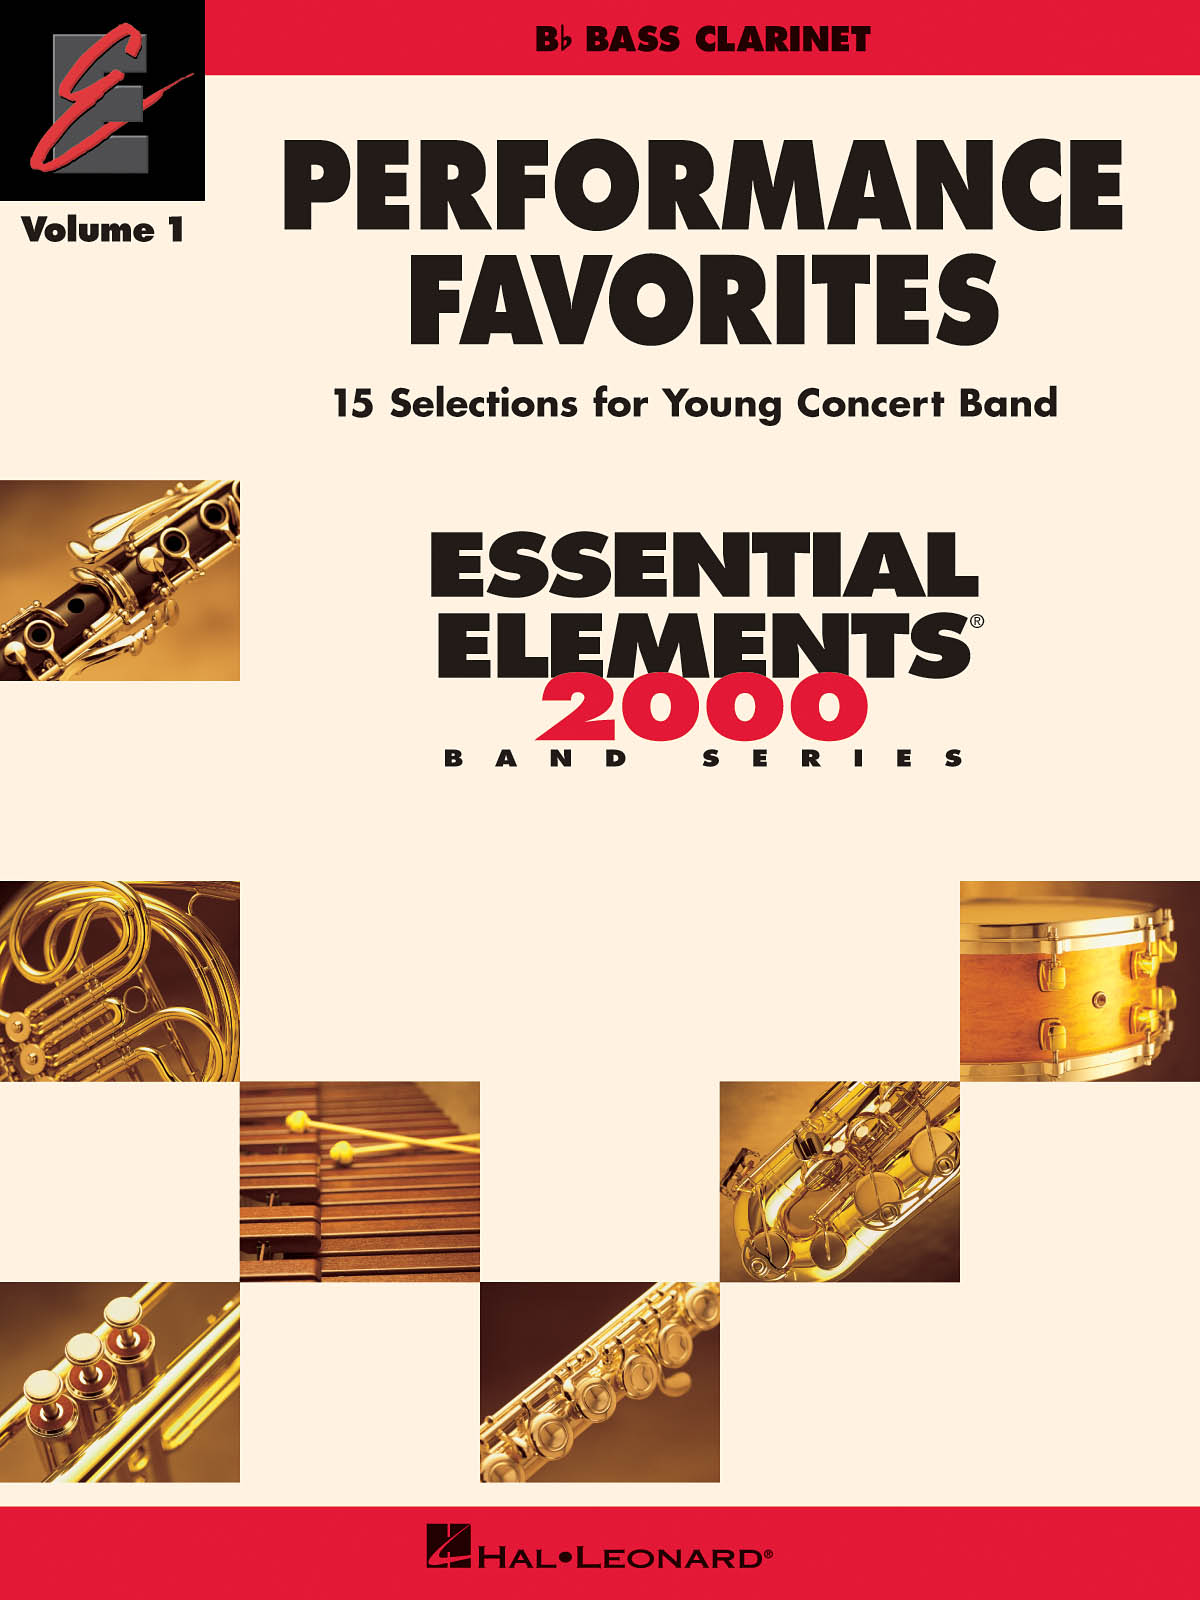 Performance Favorites Vol. 1 - Bass Clarinet - 15 Selections for Young Concert Band noty pro Bass Clarinet